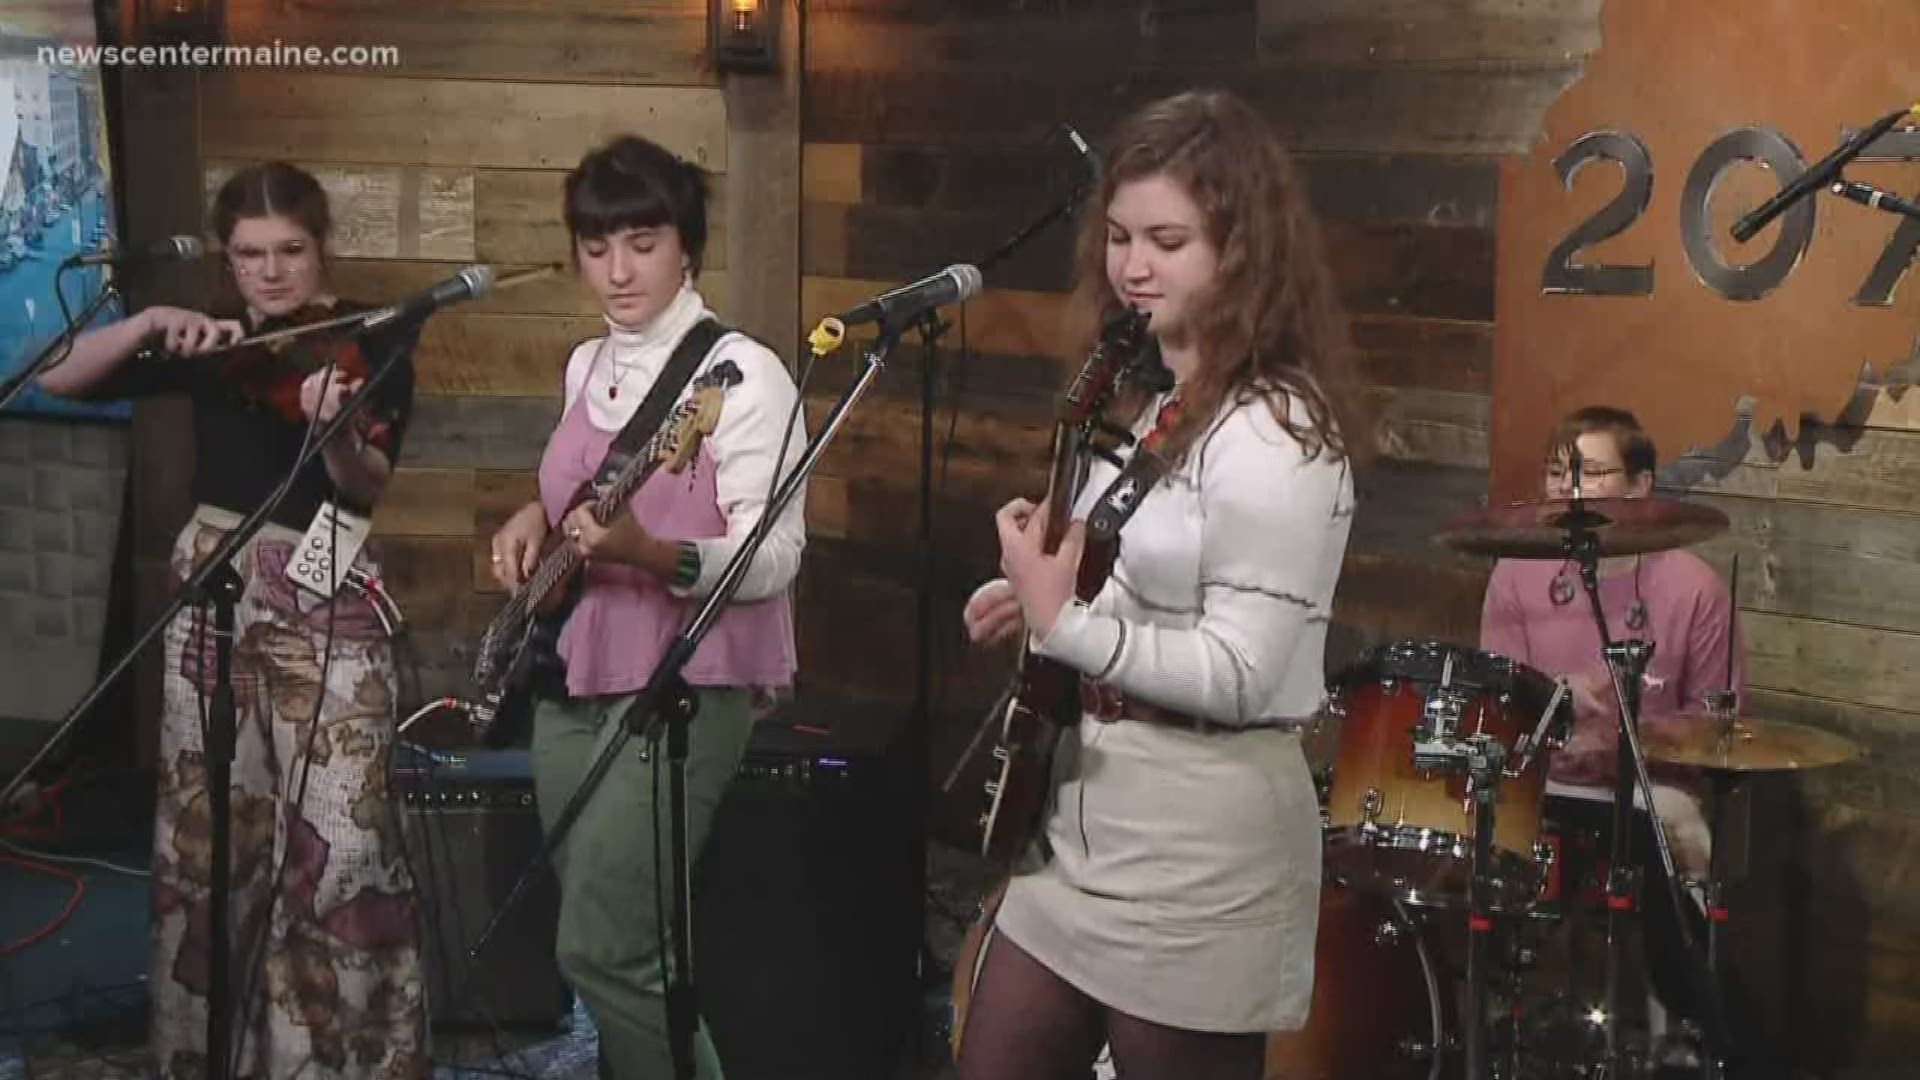 Girls Rock will showcase young bands.